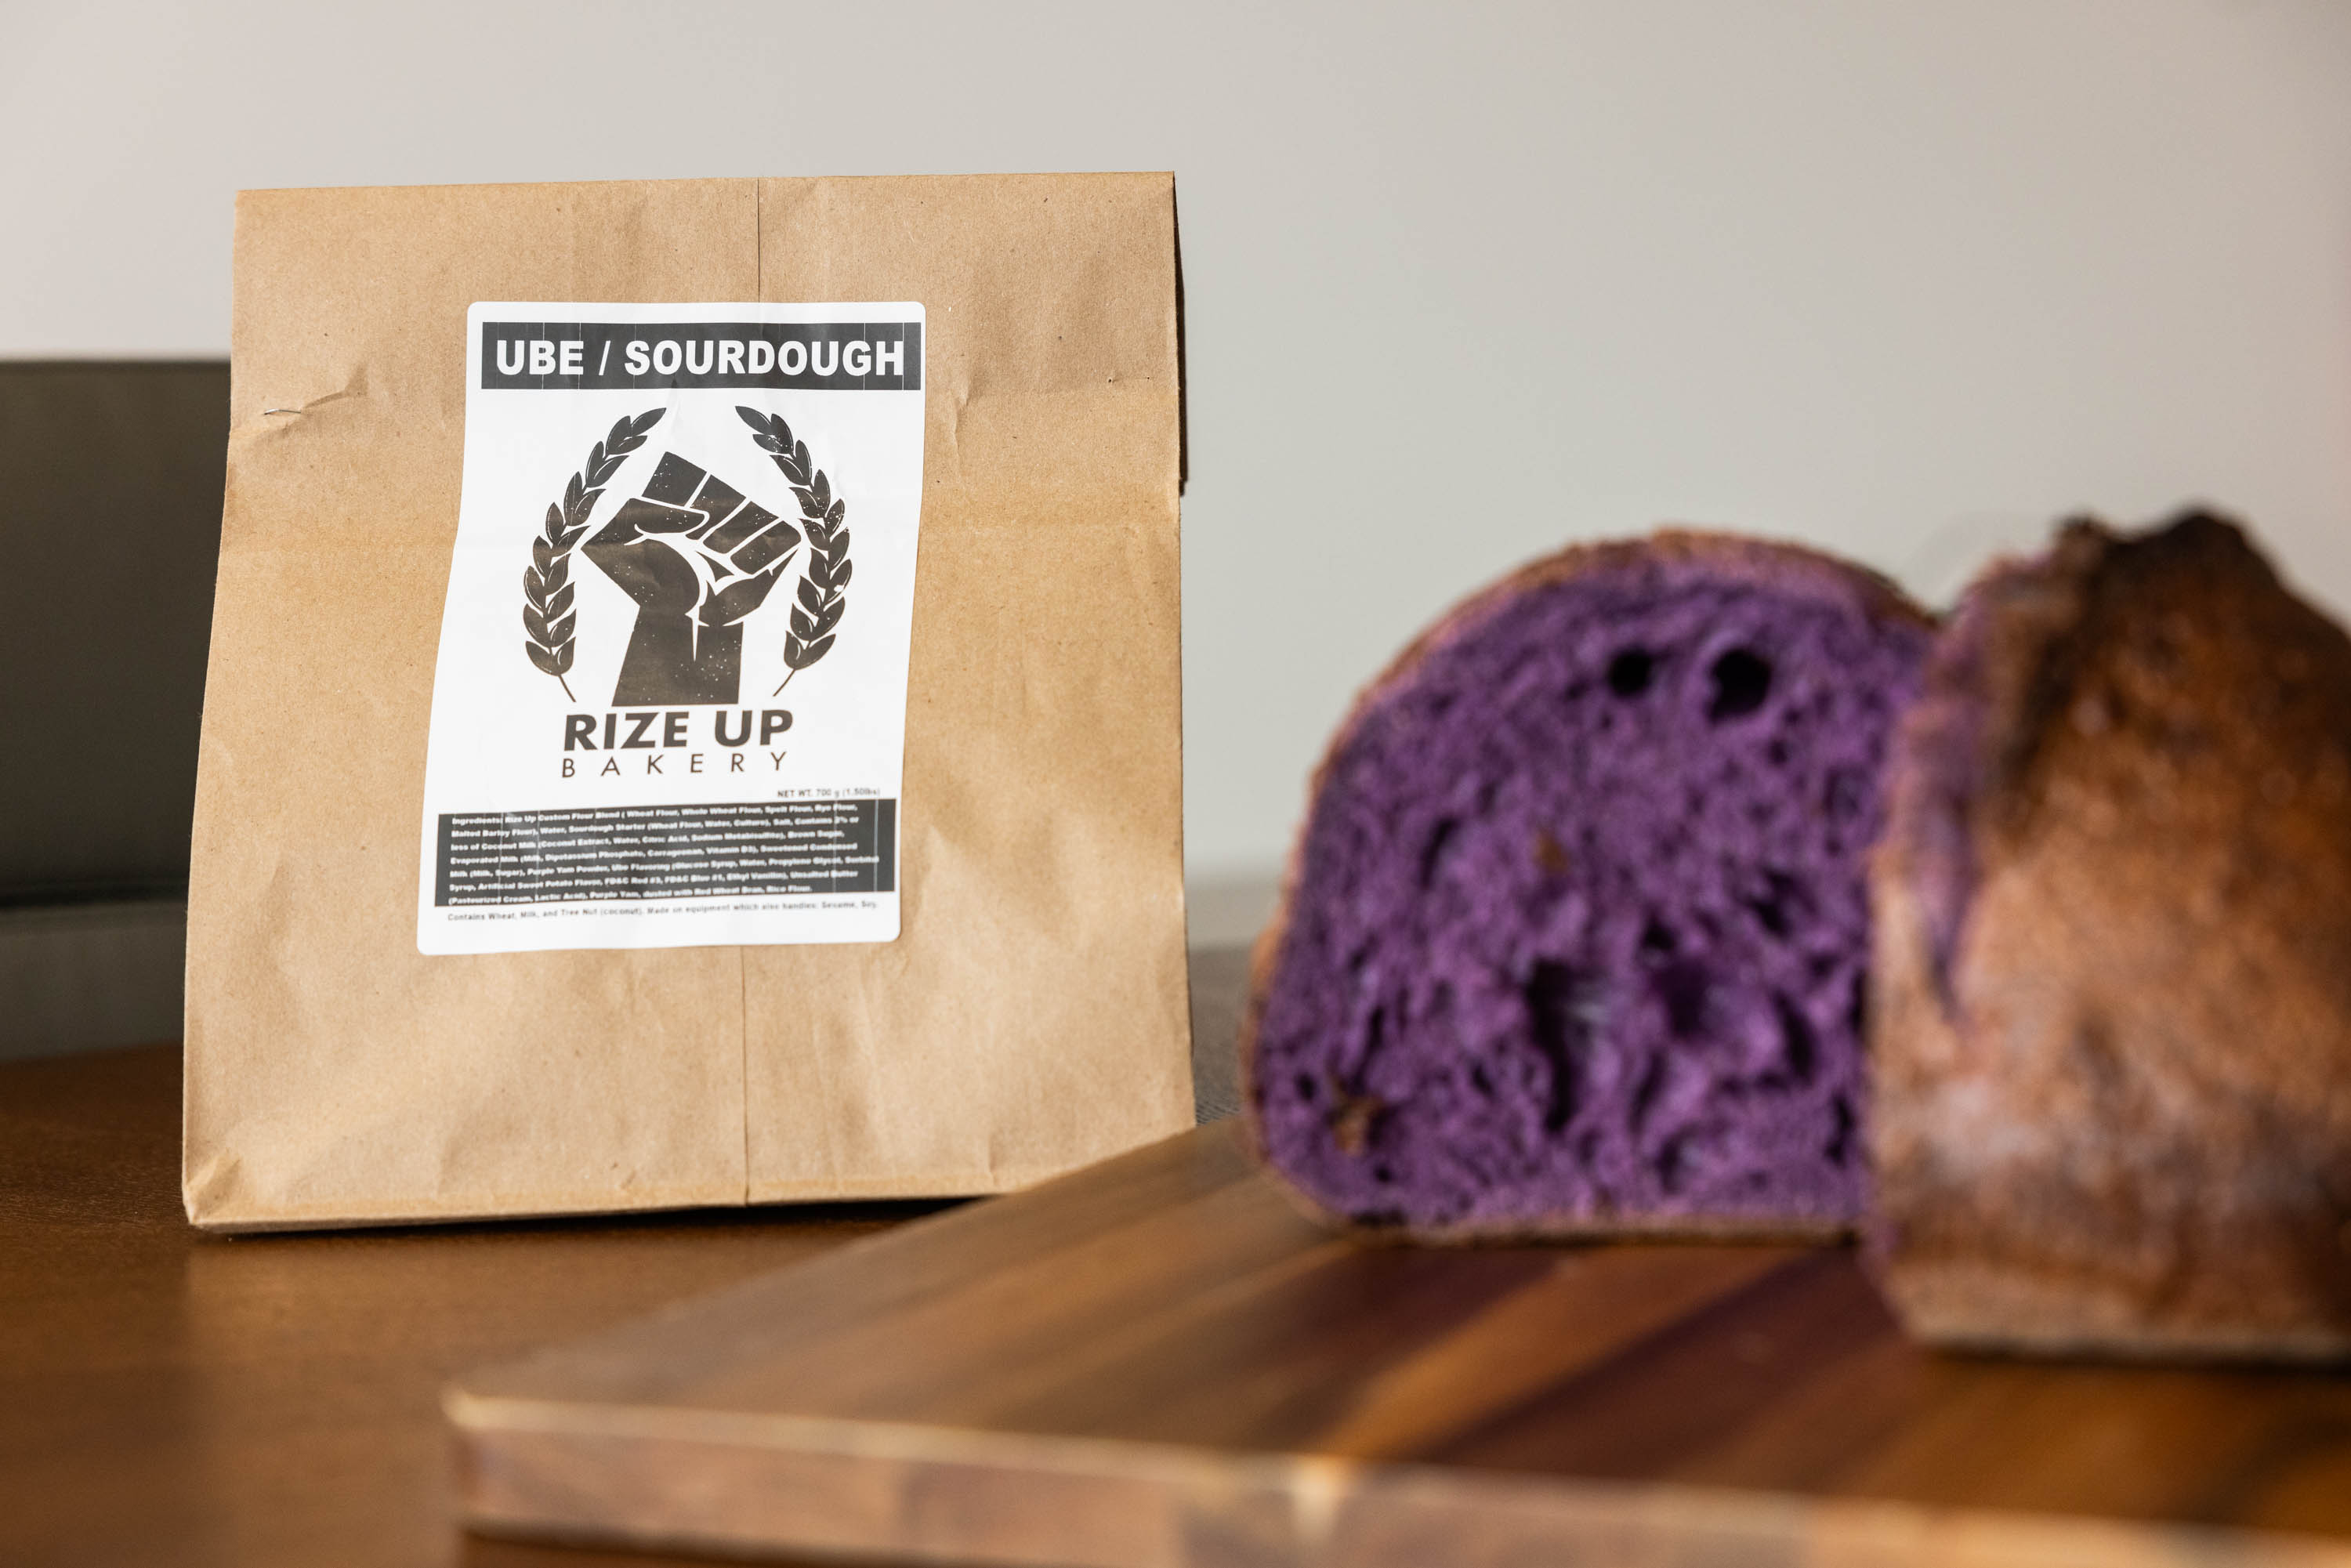 a brown paper bag is seen next to a loaf of bread that has been sliced open revealing purple dough inside